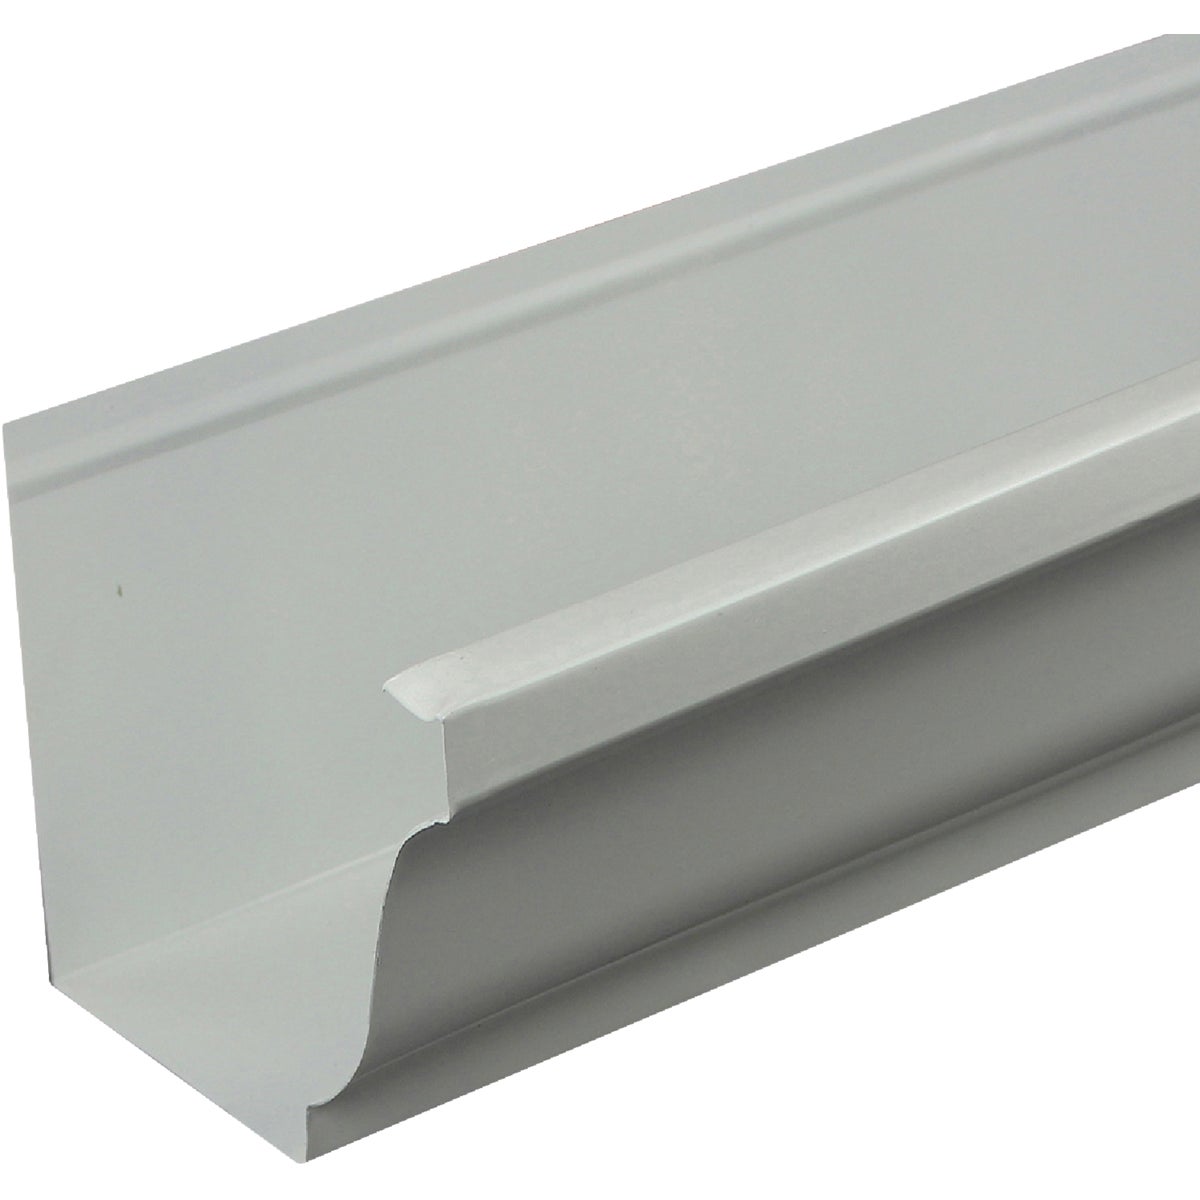 Spectra Metals 5 In. x 10 Ft. K-Style White 0.027 Aluminum Gutter